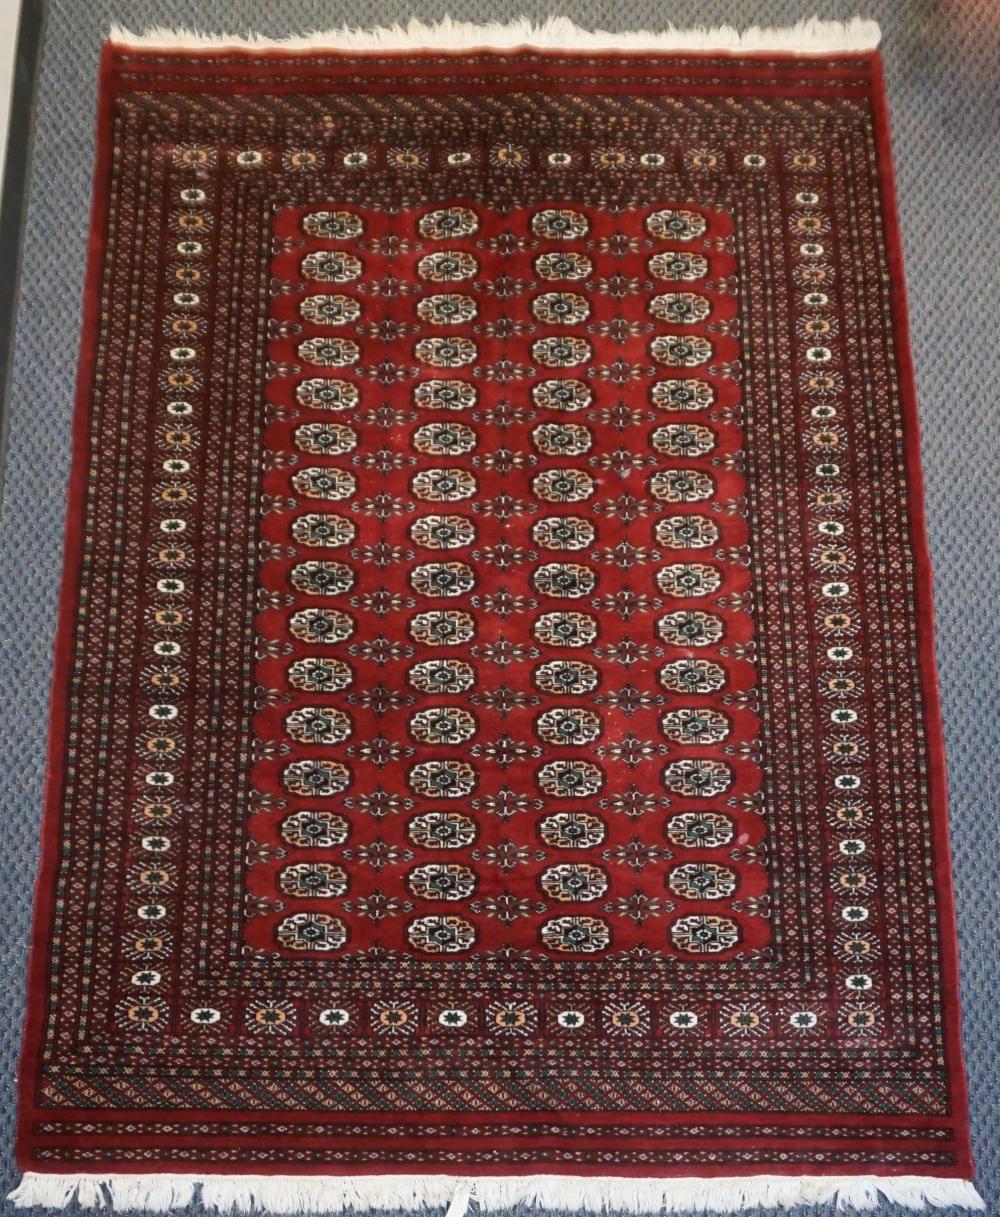 BOKHARA RUG 8 FT 9 IN X 6 FT 7 32c6db